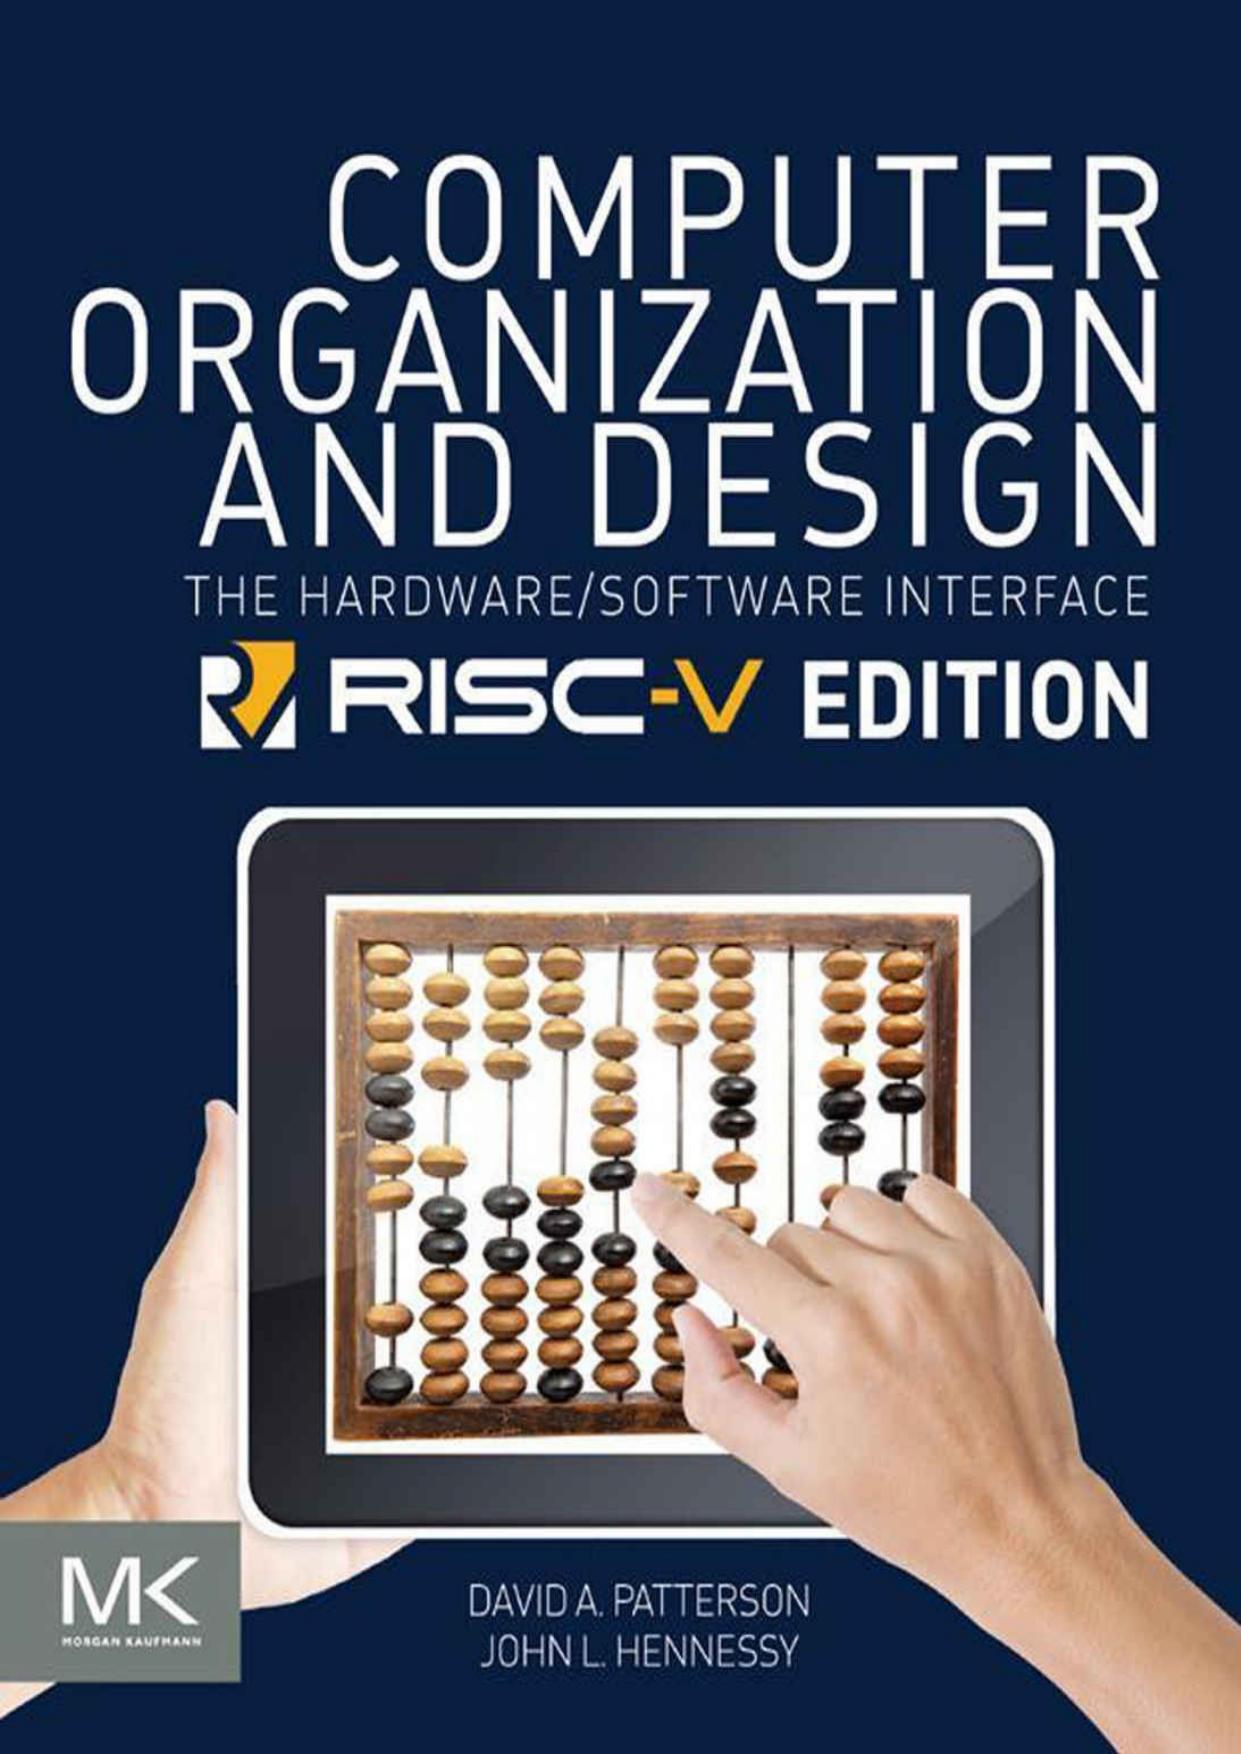 Computer Organization and Design RISC-V Edition by David A. Patterson - David A. Patterson & John L. Hennessy.jpg